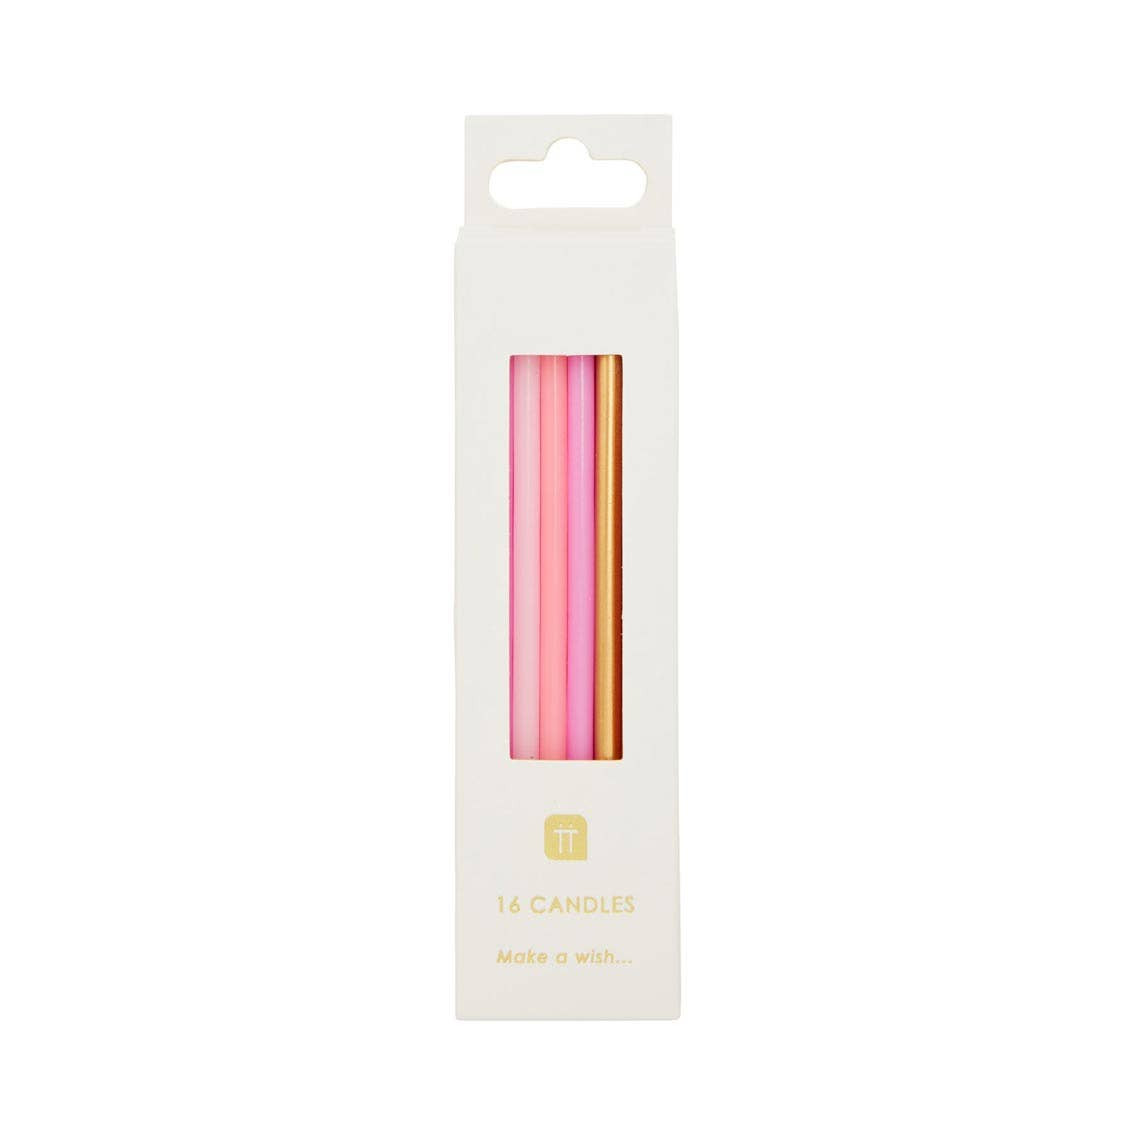 Candles - Rose, Pink, Gold, 16 pack